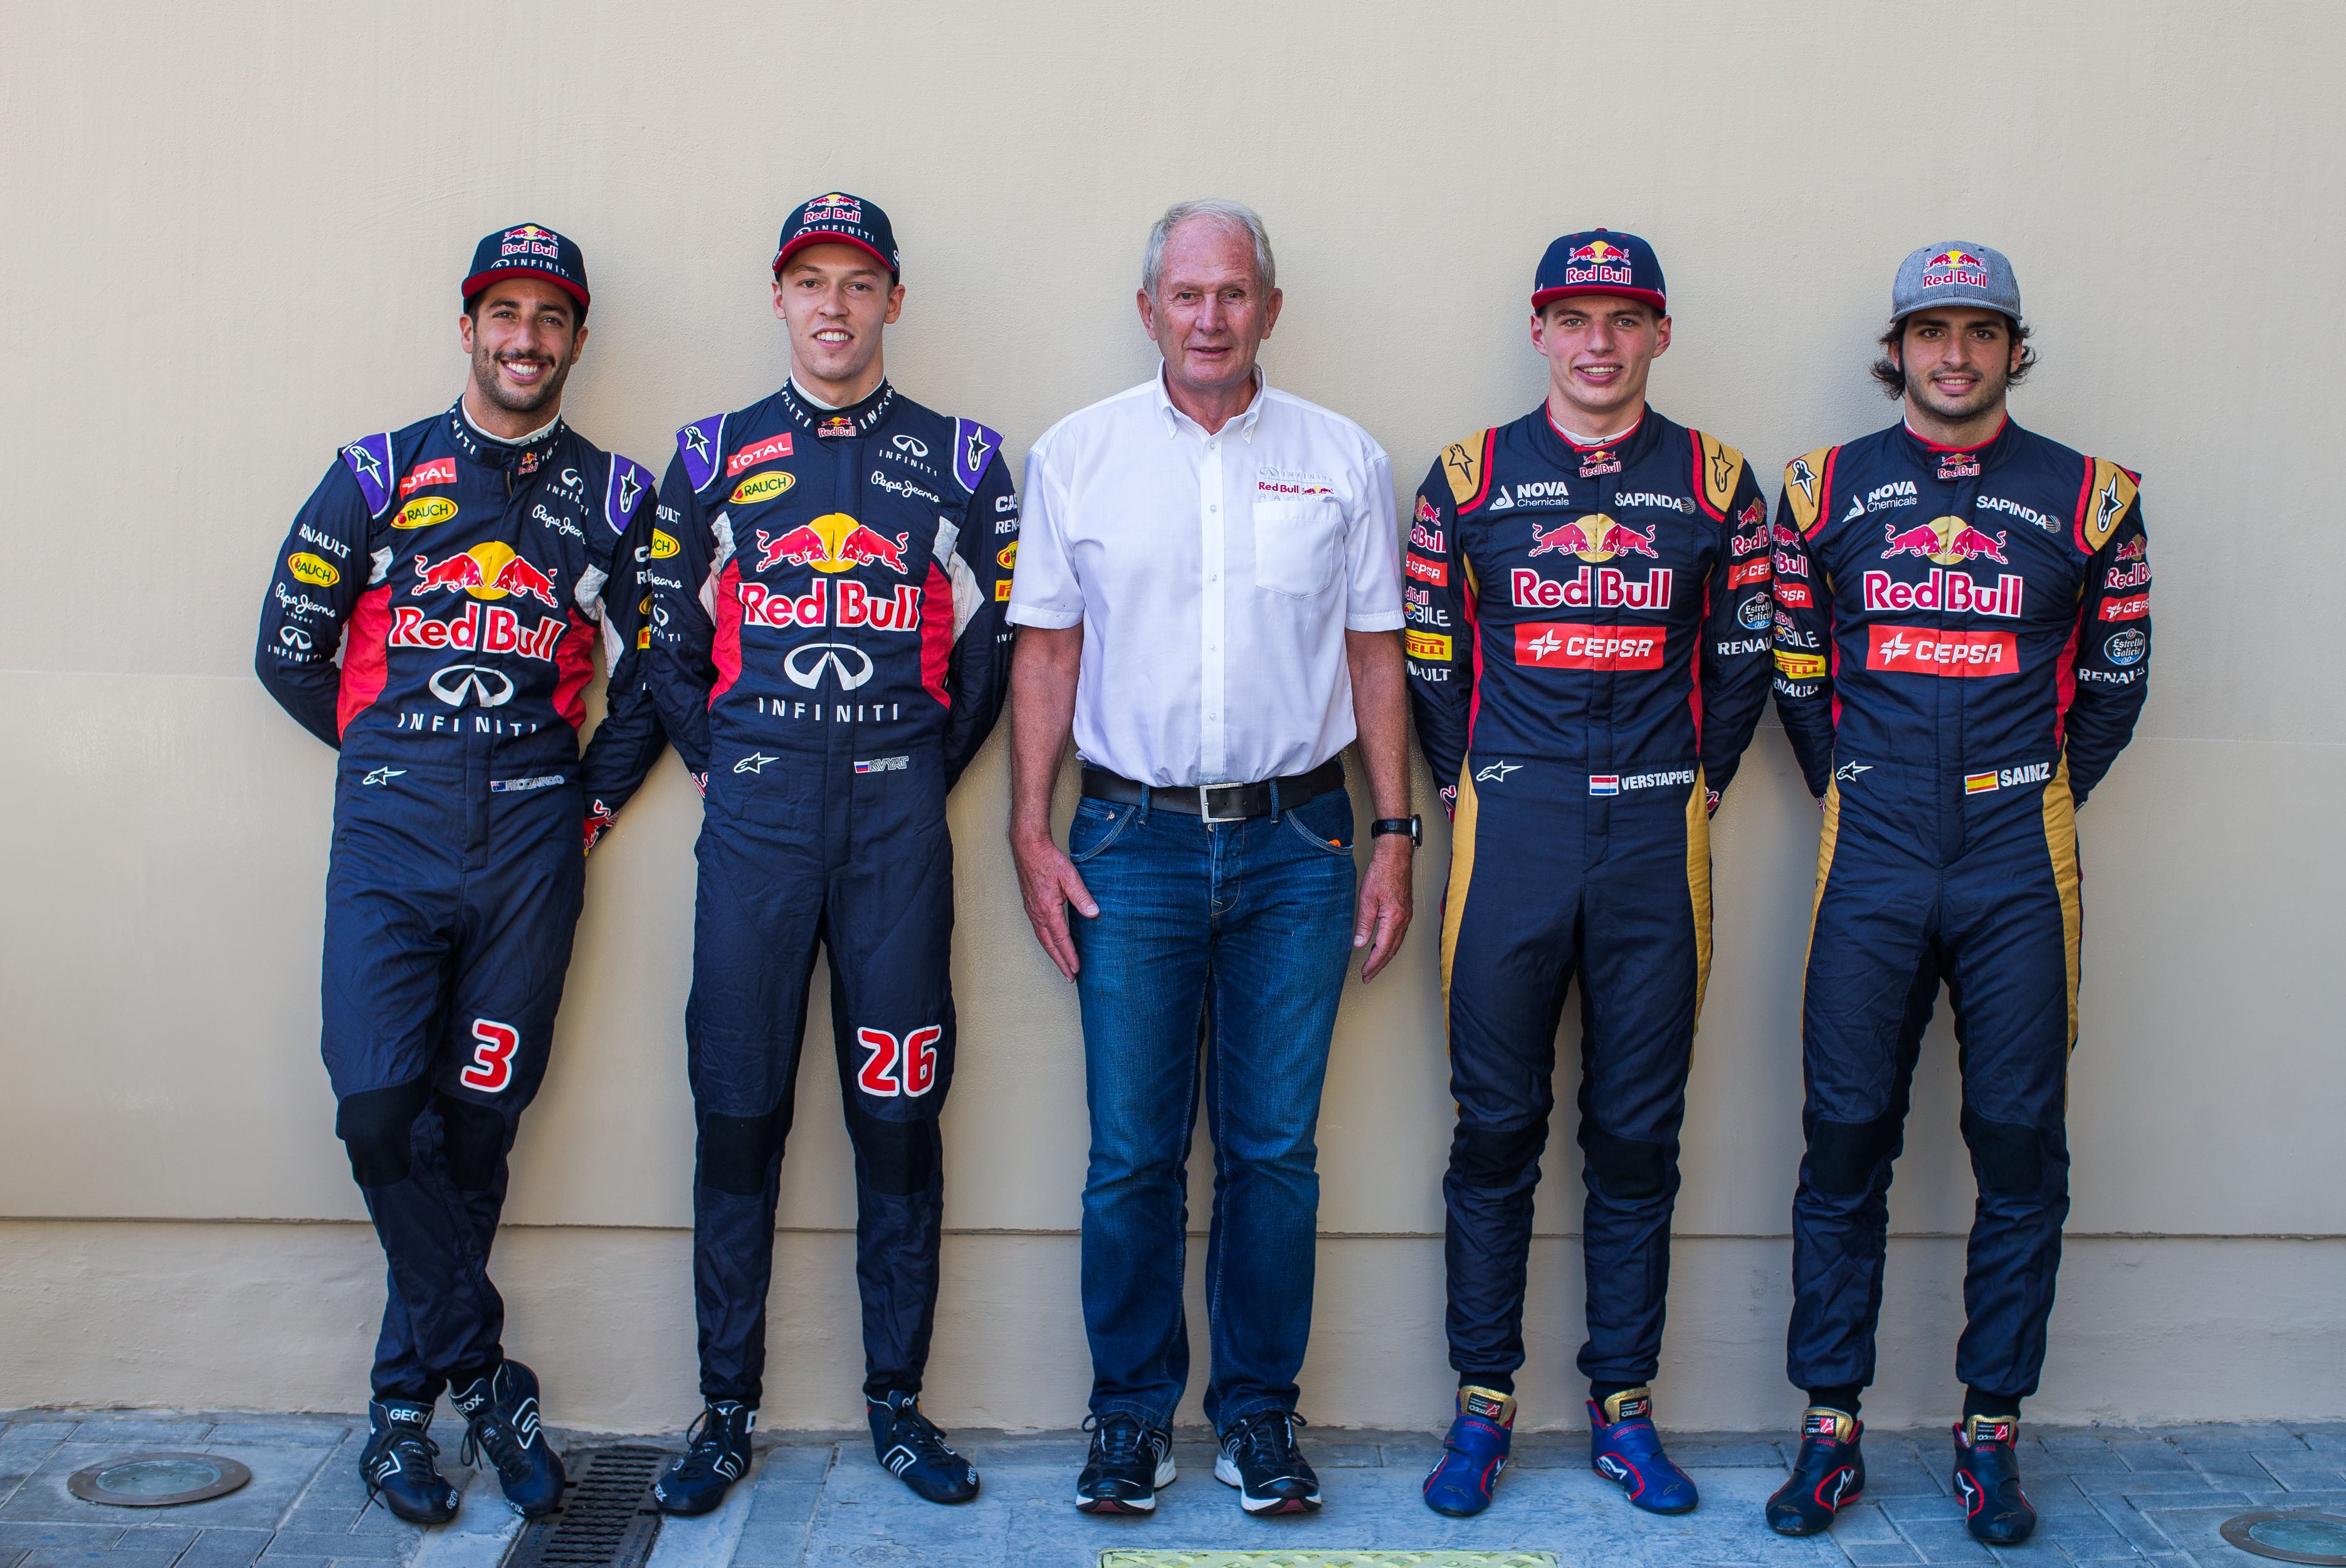 Helmut Marko (centre) spoke about the sympathy he had for Sainz having Verstappen as his team-mate in his debut season in Formula 1